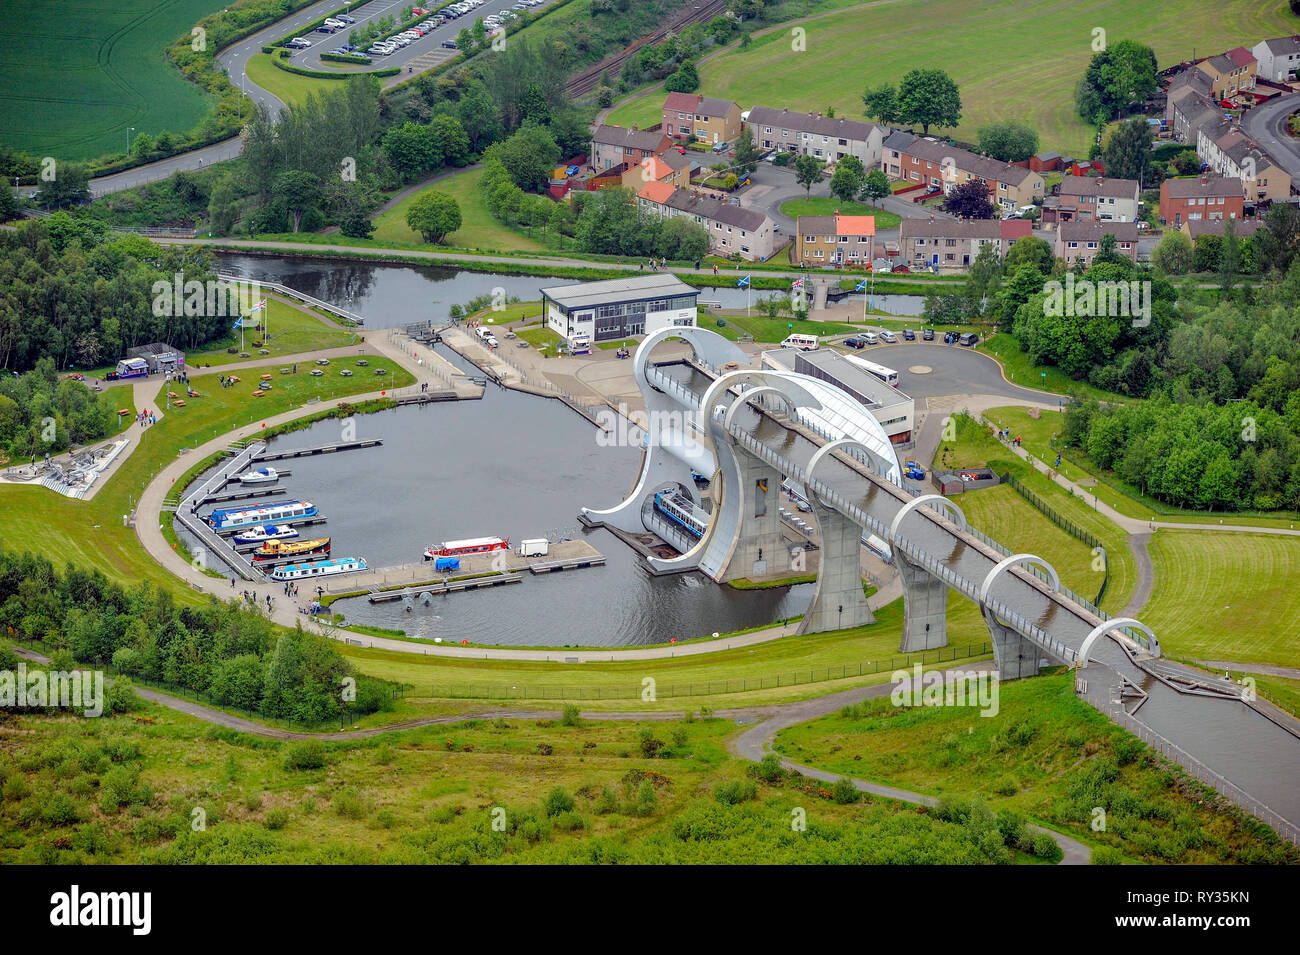 Aerial view of the Falkirk Wheel which connects the Forth & Clyde canal with the Union canal near Falkirk Scotland. Stock Photo